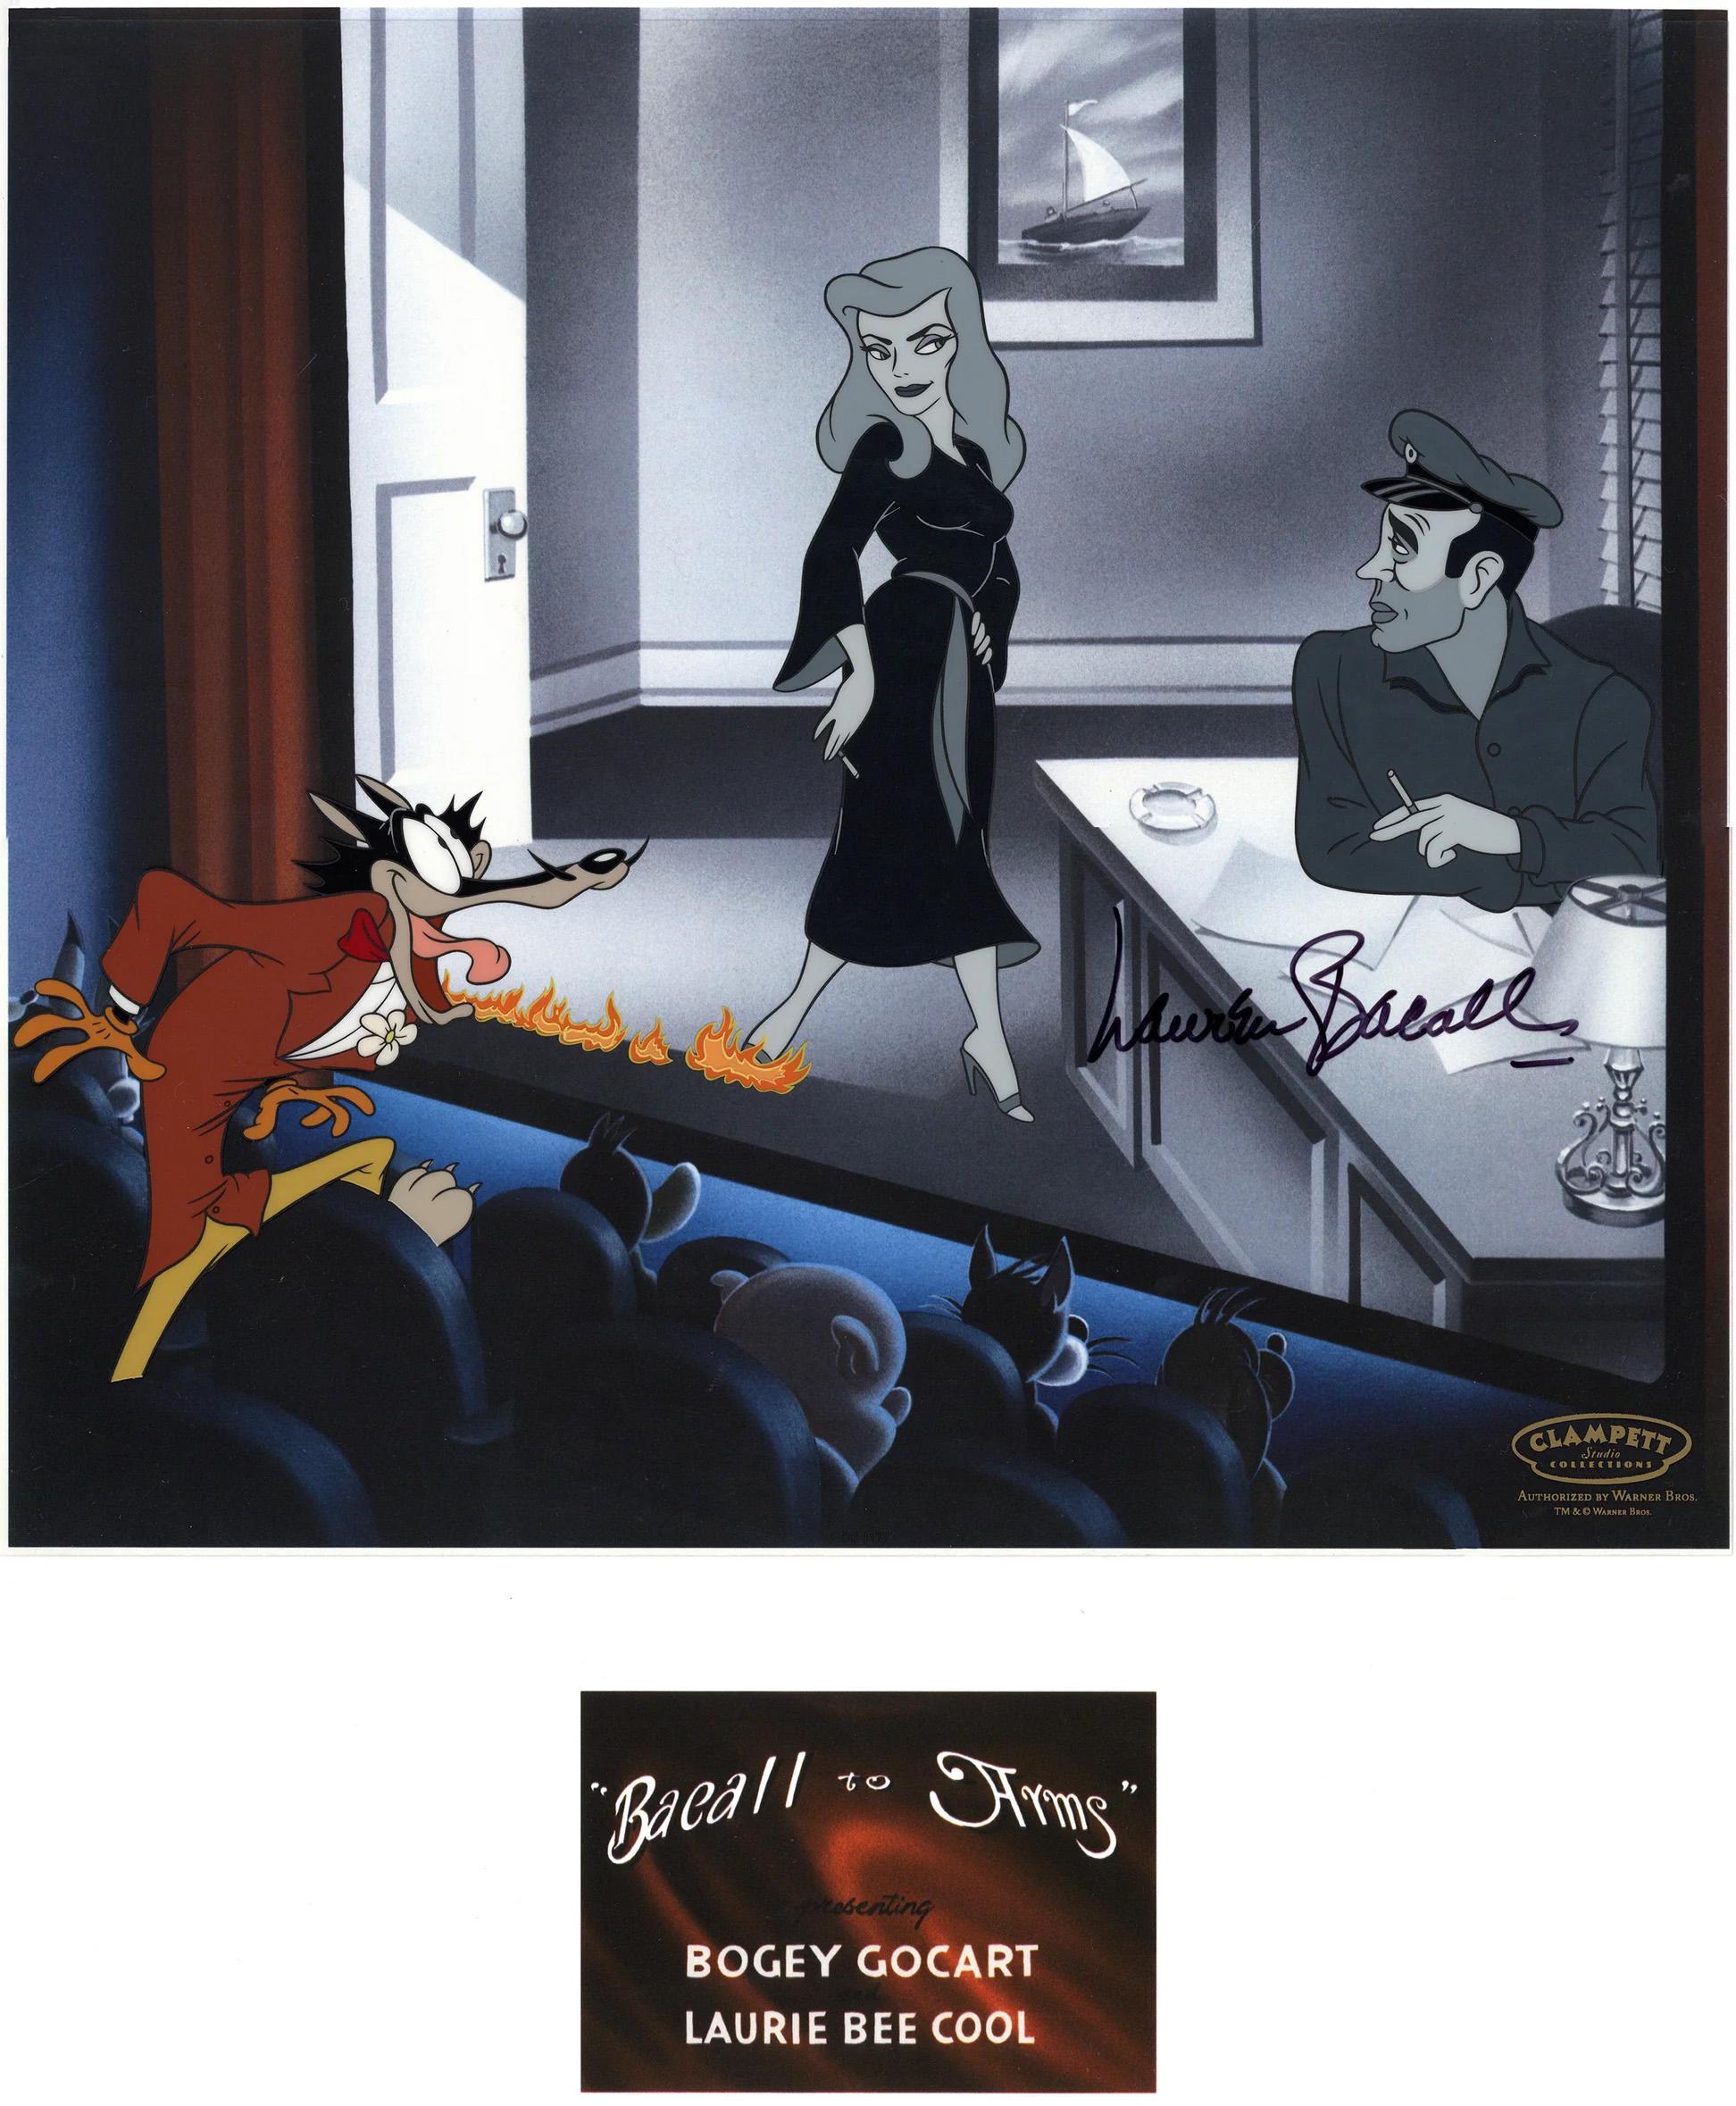 Bacall To Arms Limited Edition Cel signed by Lauren Bacall - Art by Looney Tunes Studio Artists